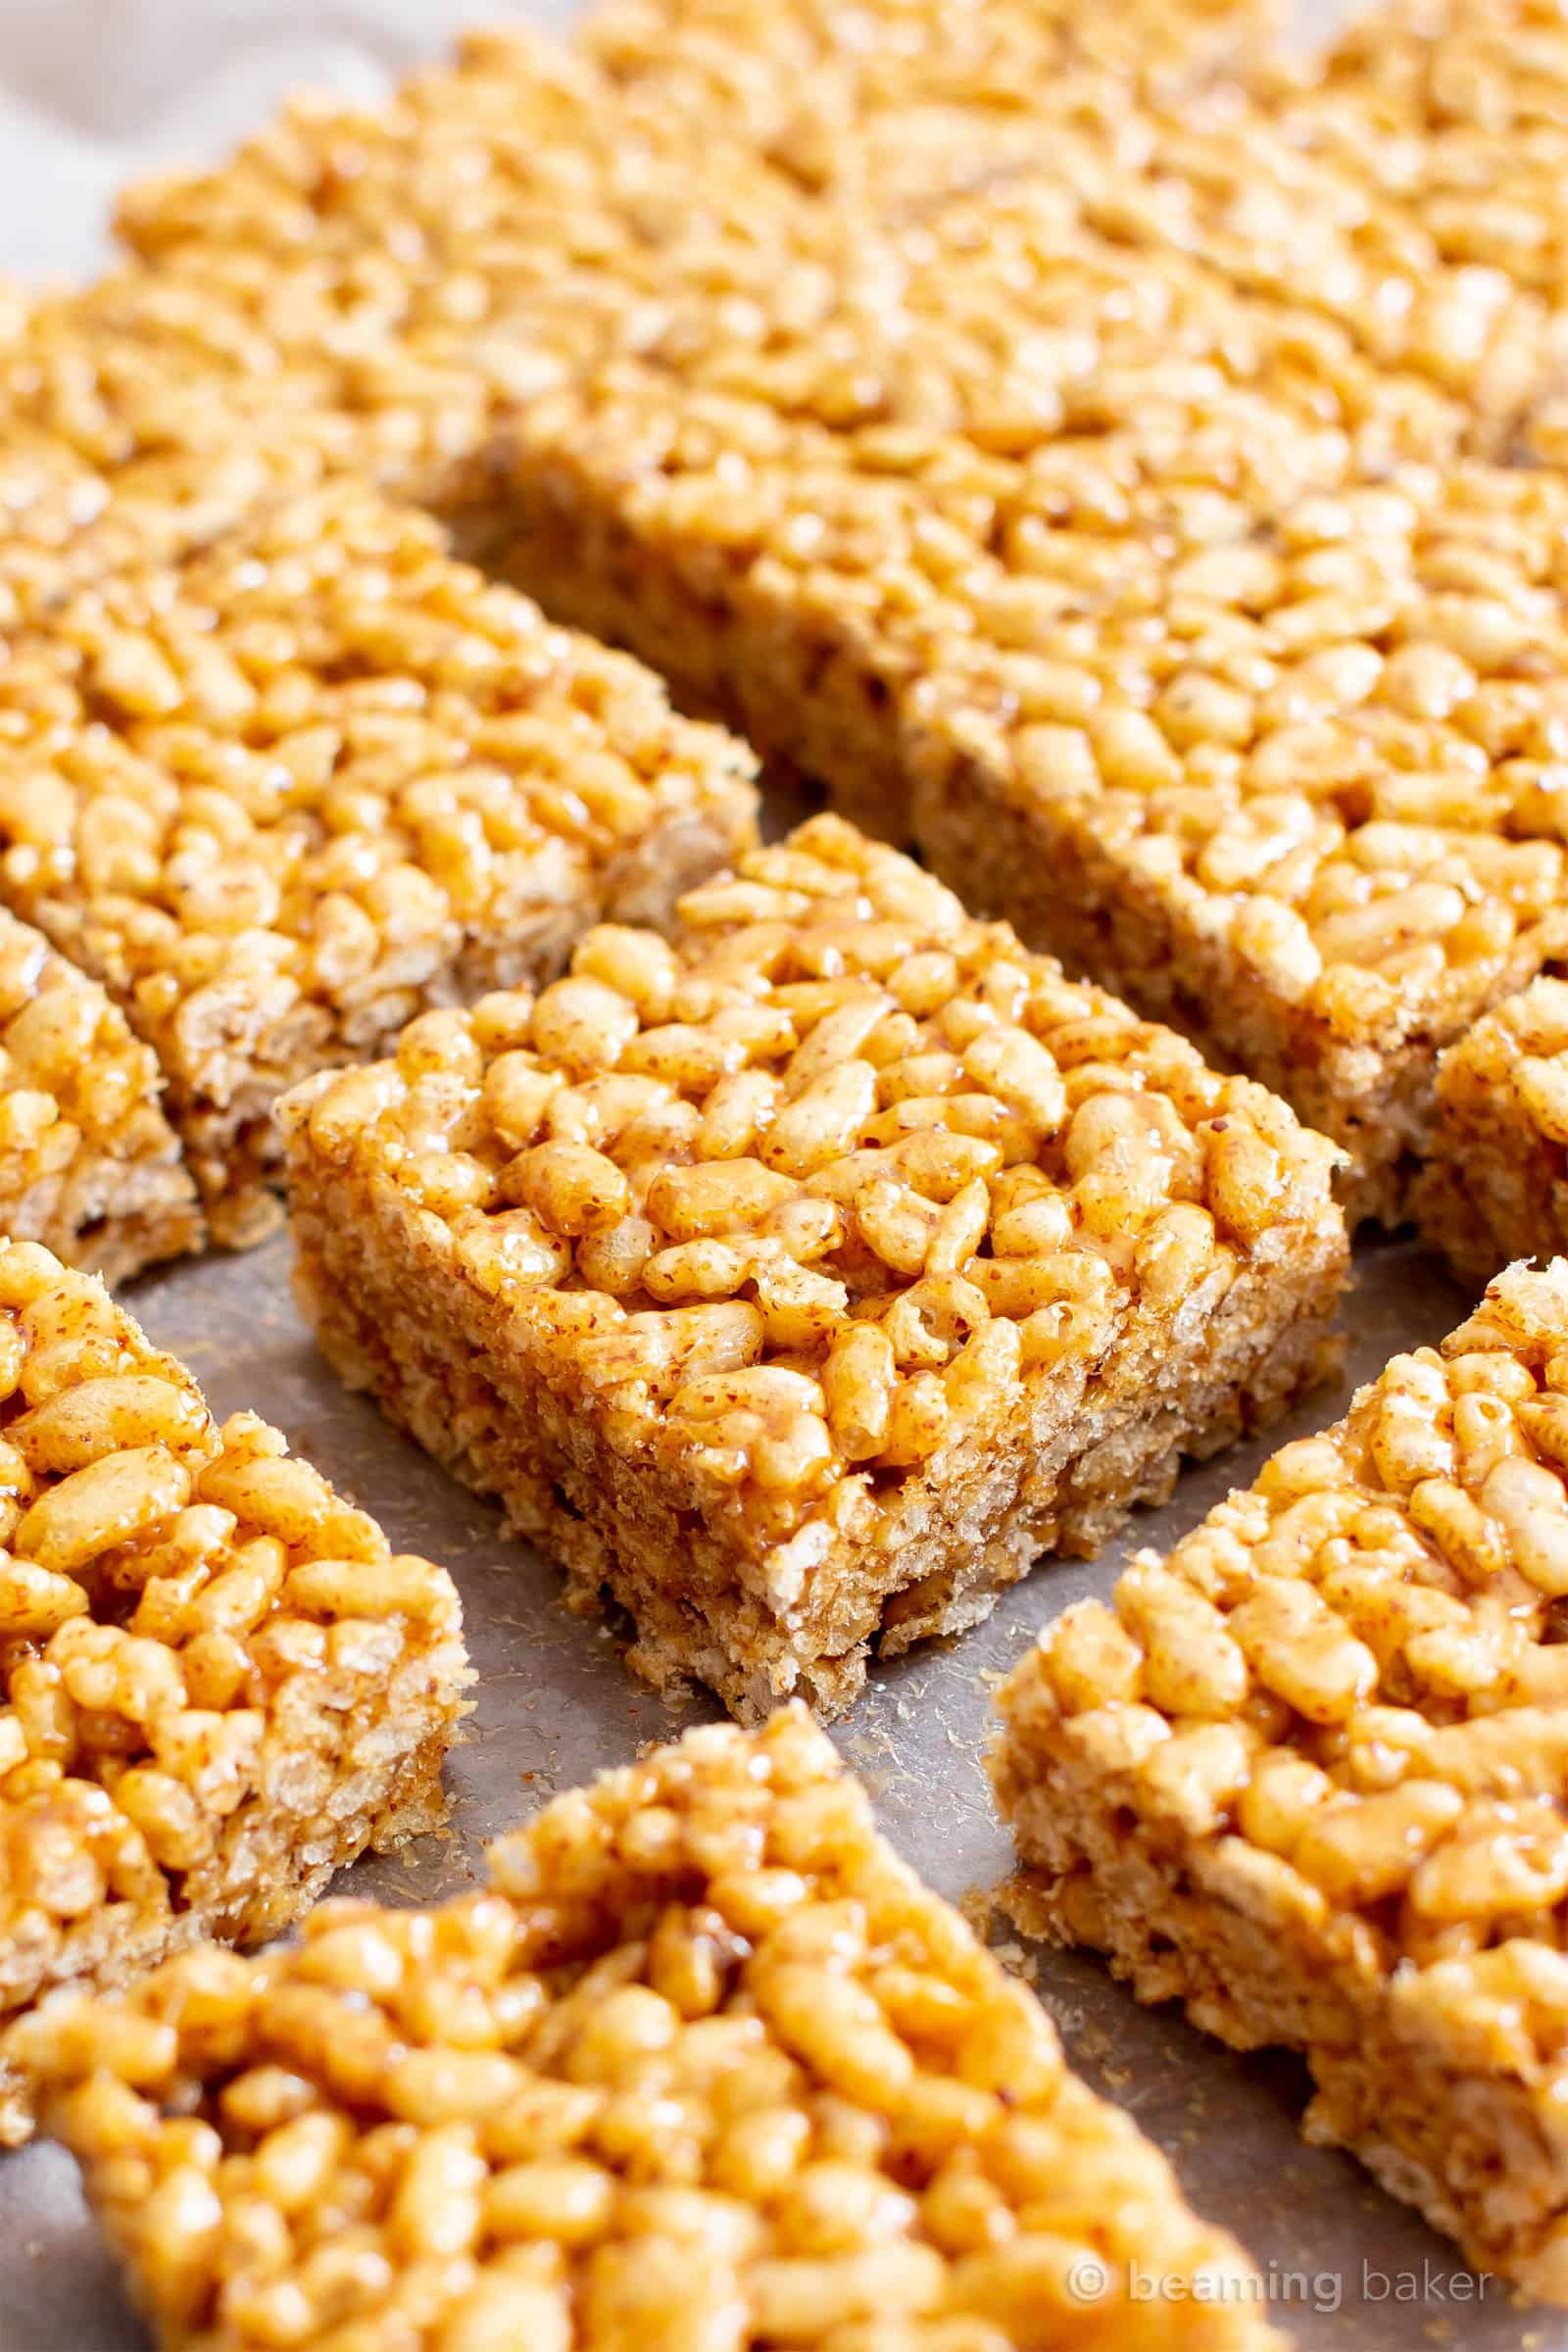 the final step in learning how to make rice crispy treats without marshmallow is slicing the treats into bars